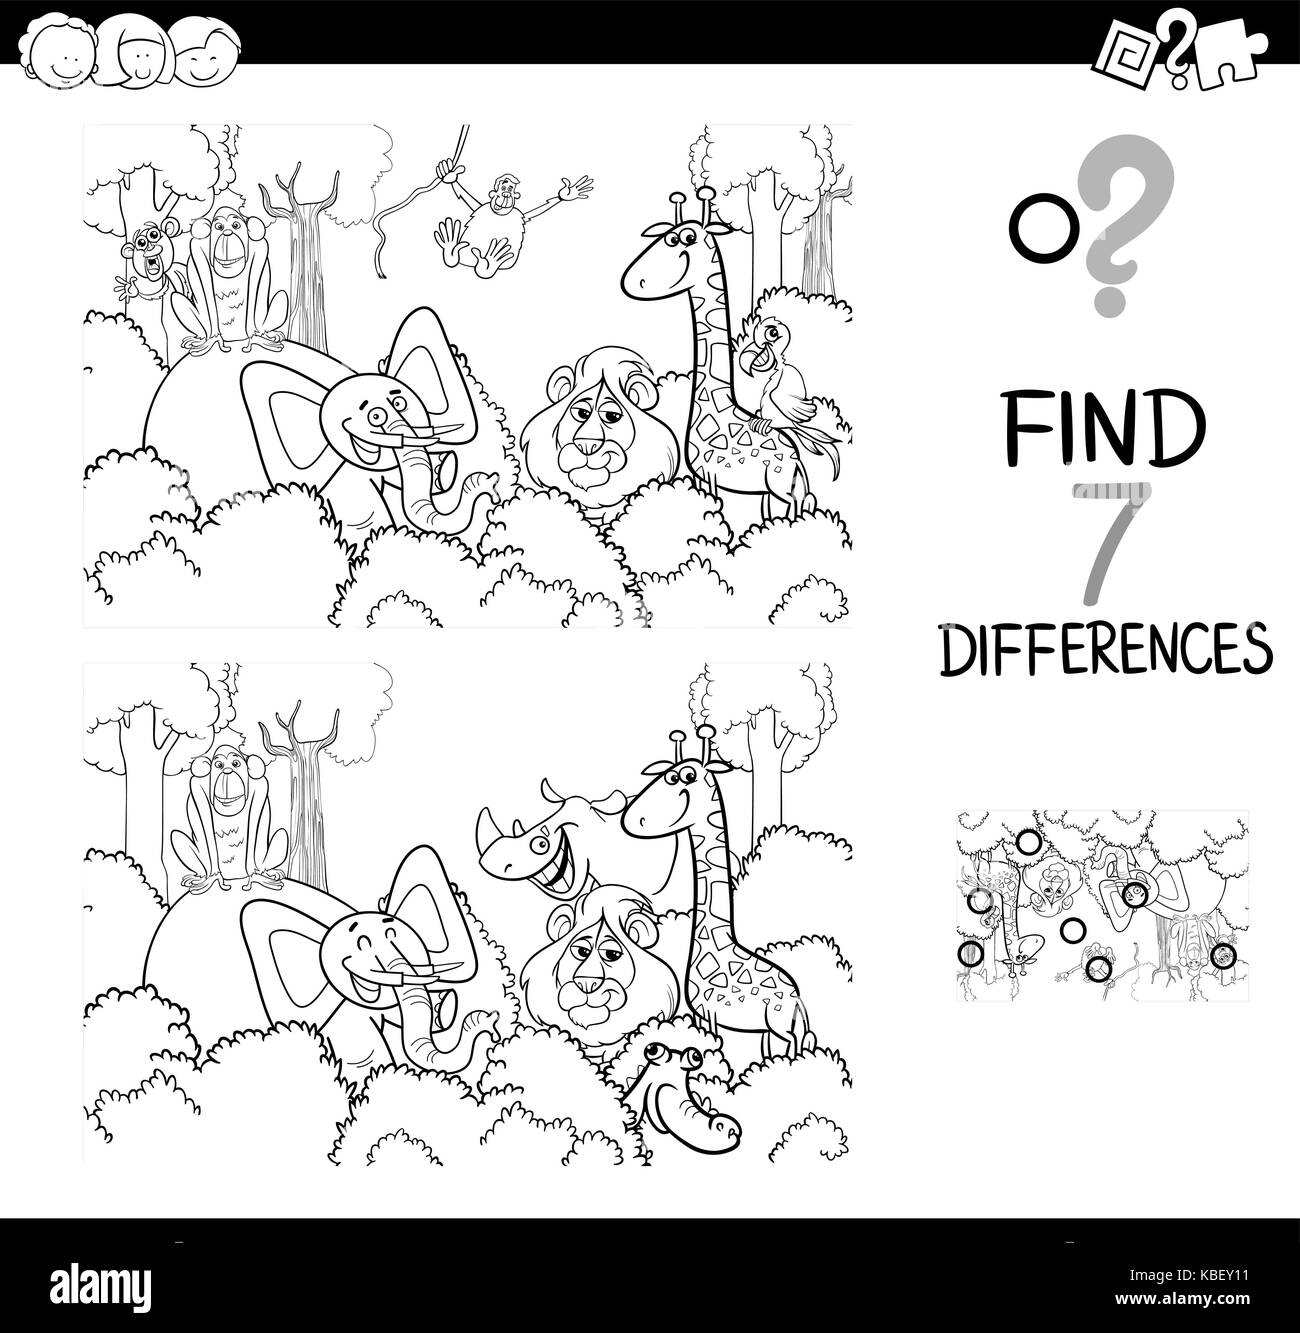 Black and White Cartoon Illustration of Find the Differences Between Pictures Educational Activity Game for Children with Wild Animal Characters Group Stock Vector